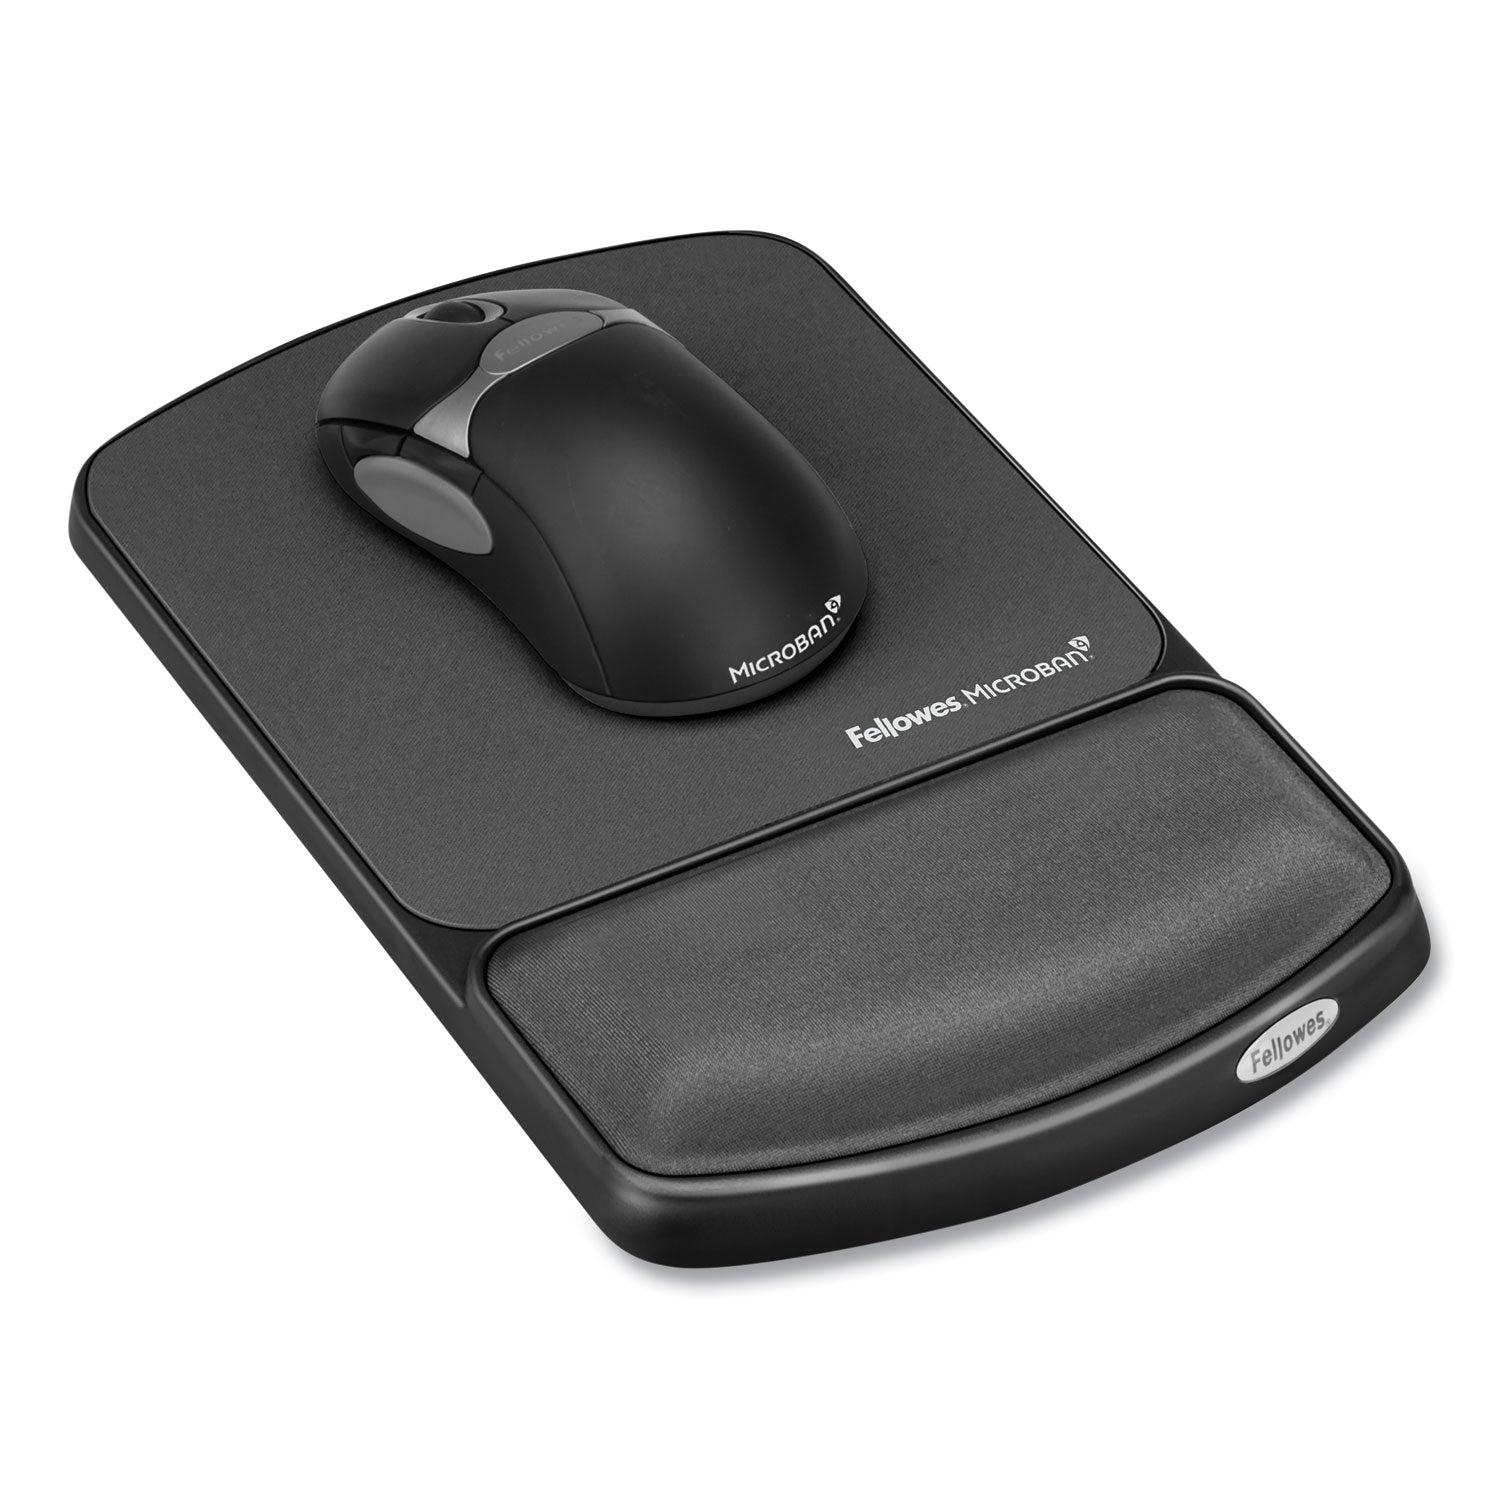 Mouse Pad with Wrist Support with Microban Protection, 6.75 x 10.12, Graphite - 